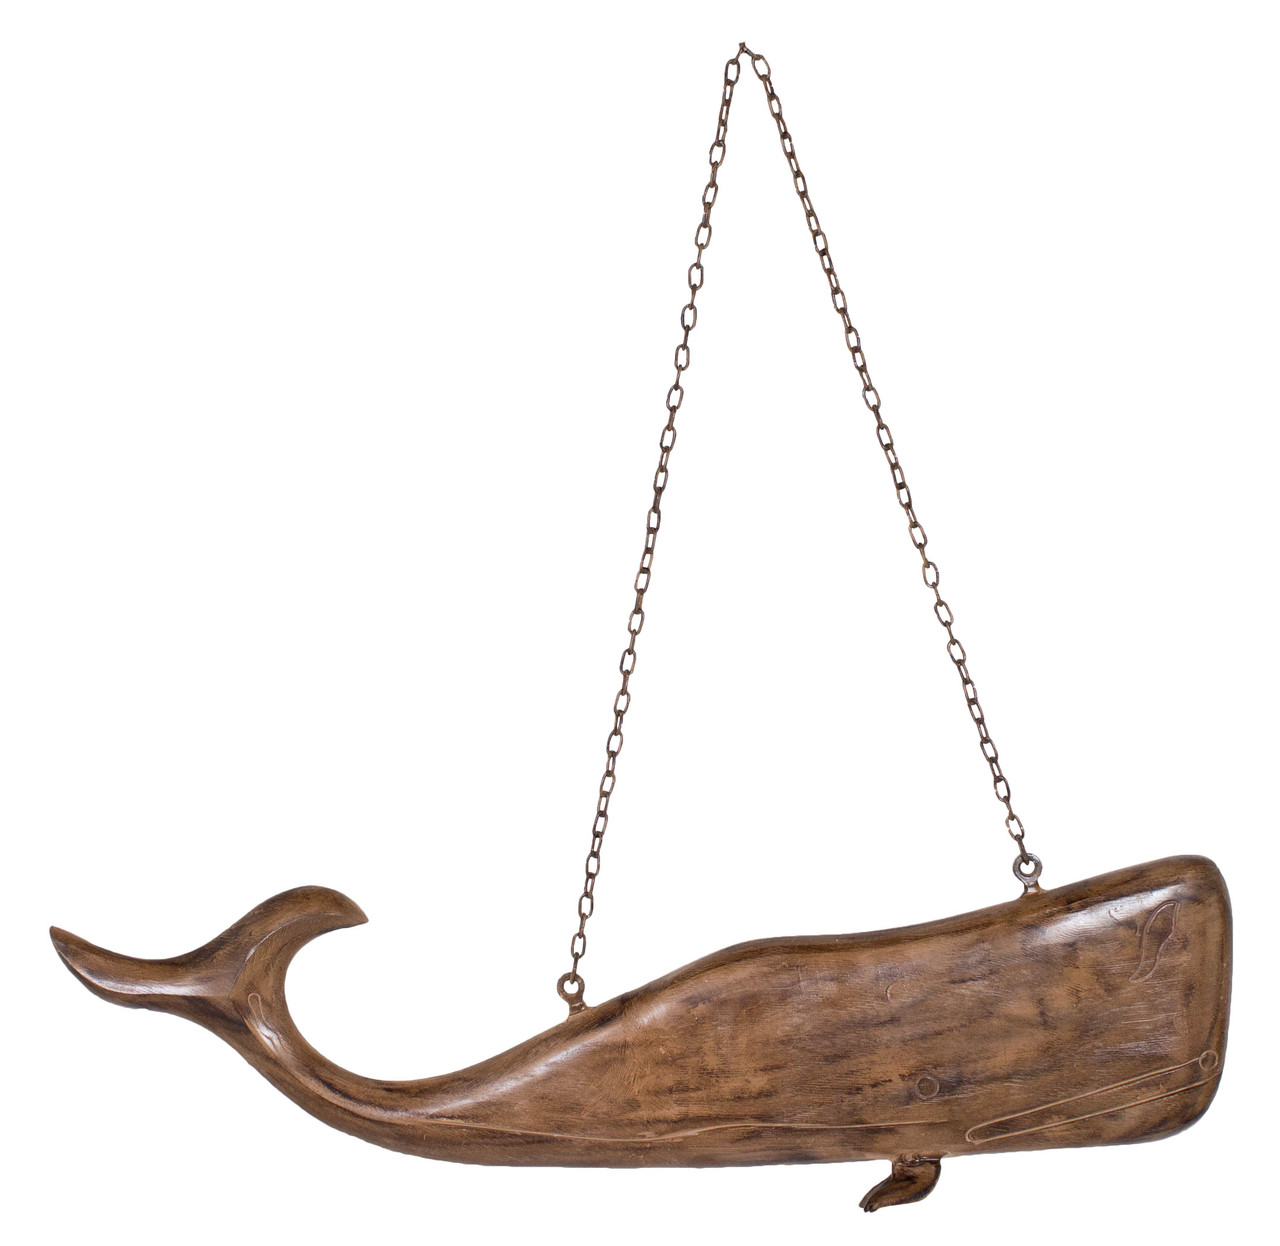 (MAL-190)
Extra Large Antique Rust Finished  Hanging Whale with Chain